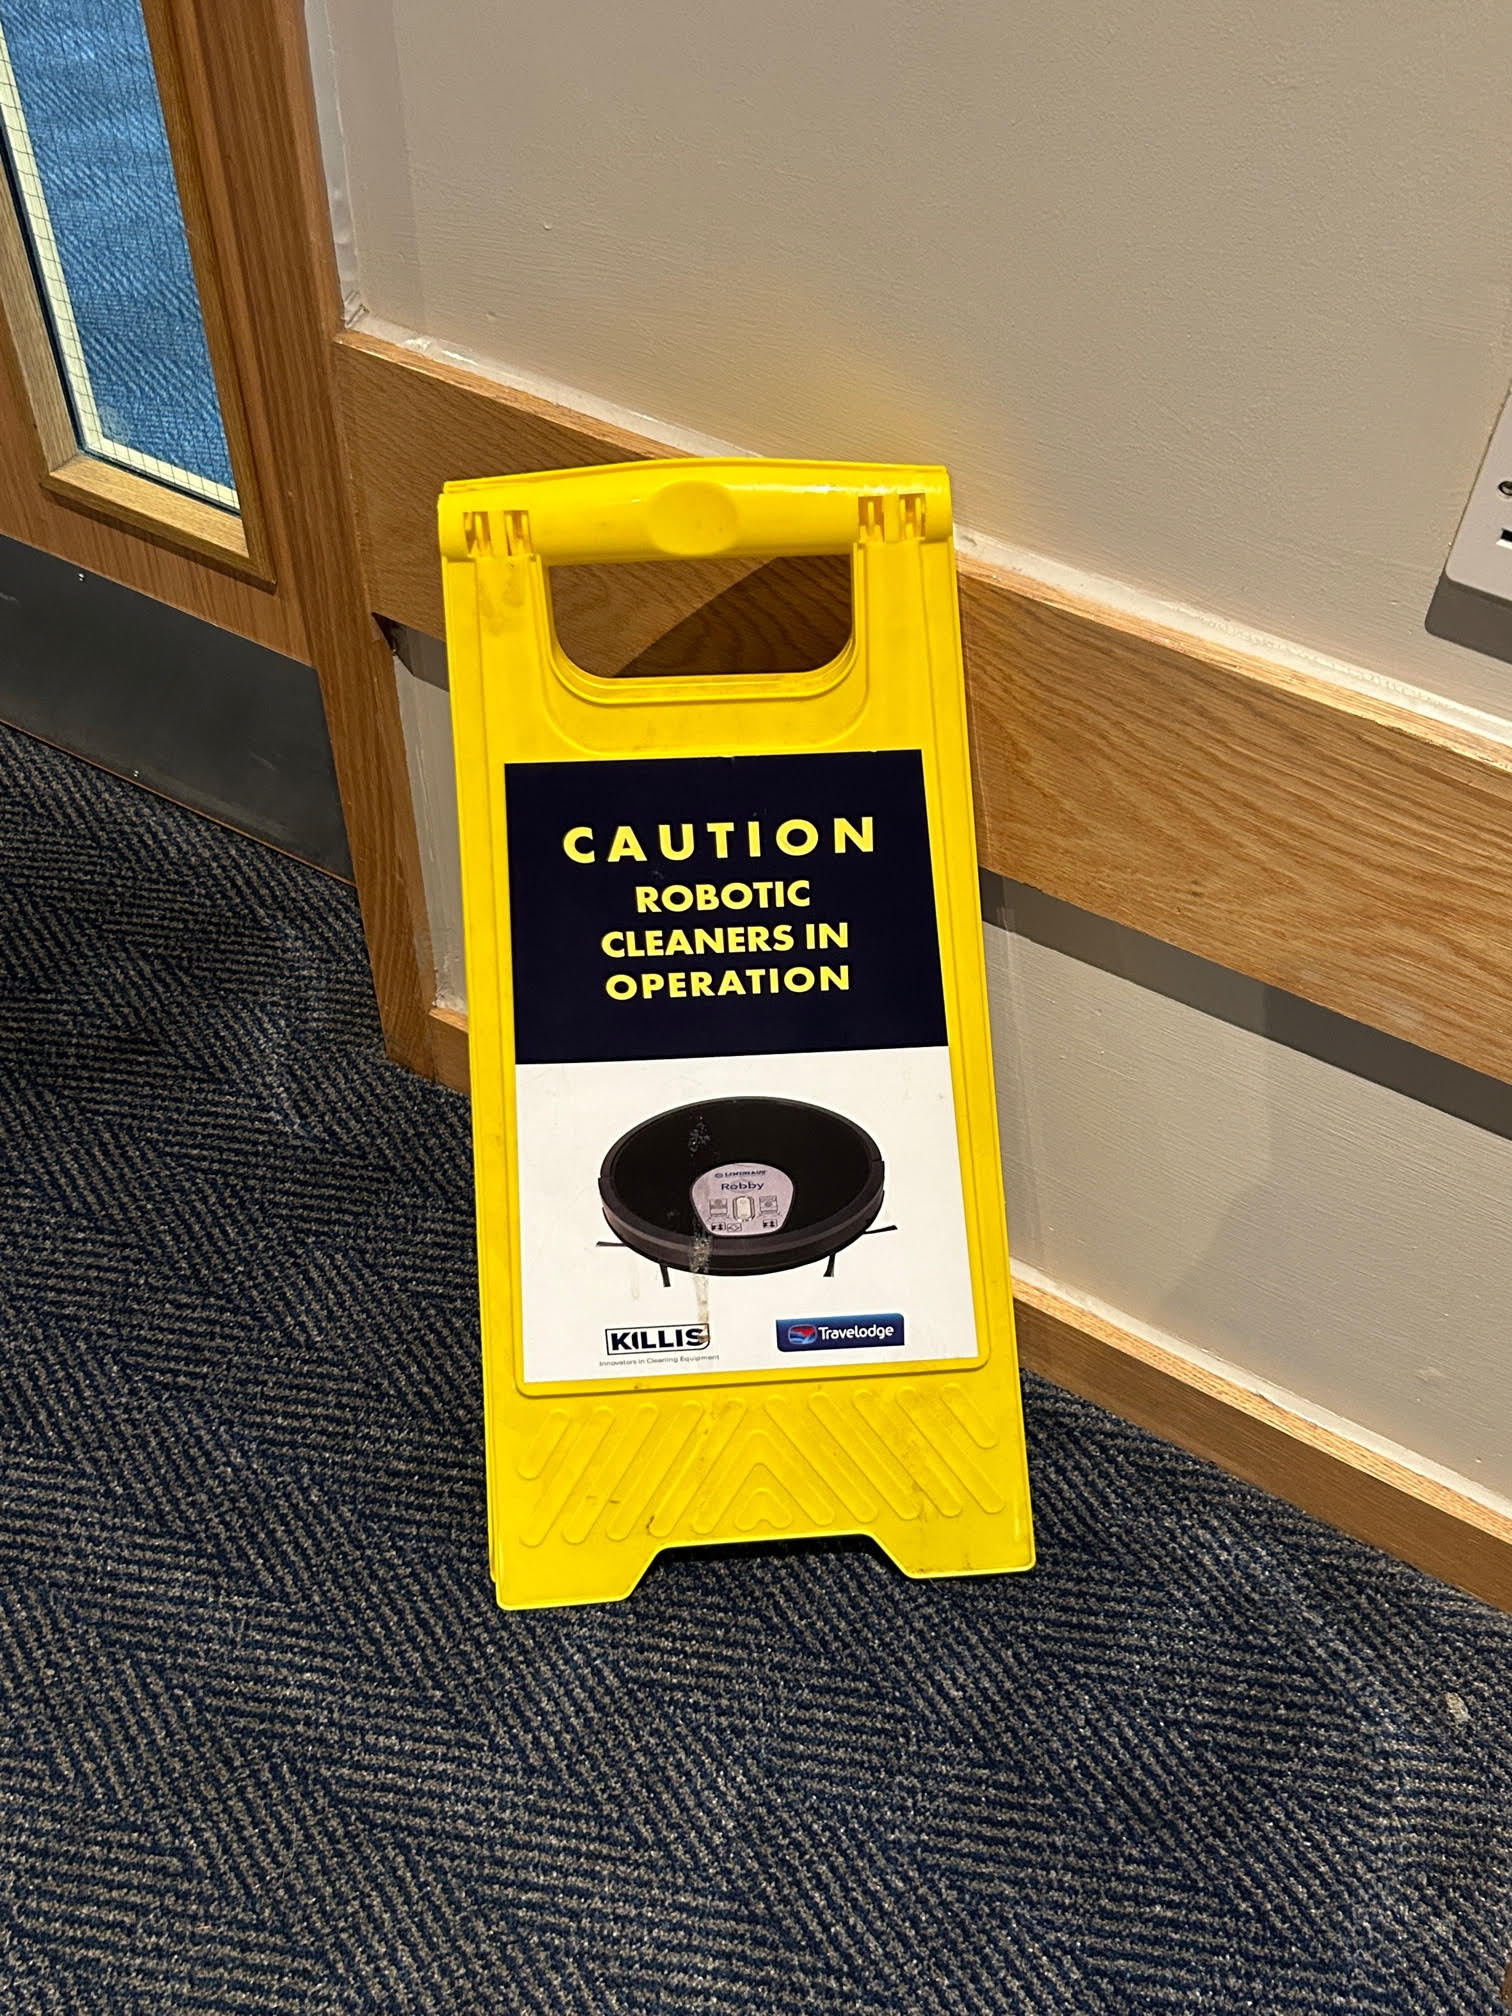 Image of yellow floor sign that reads "caution robotoic cleaners in operation".